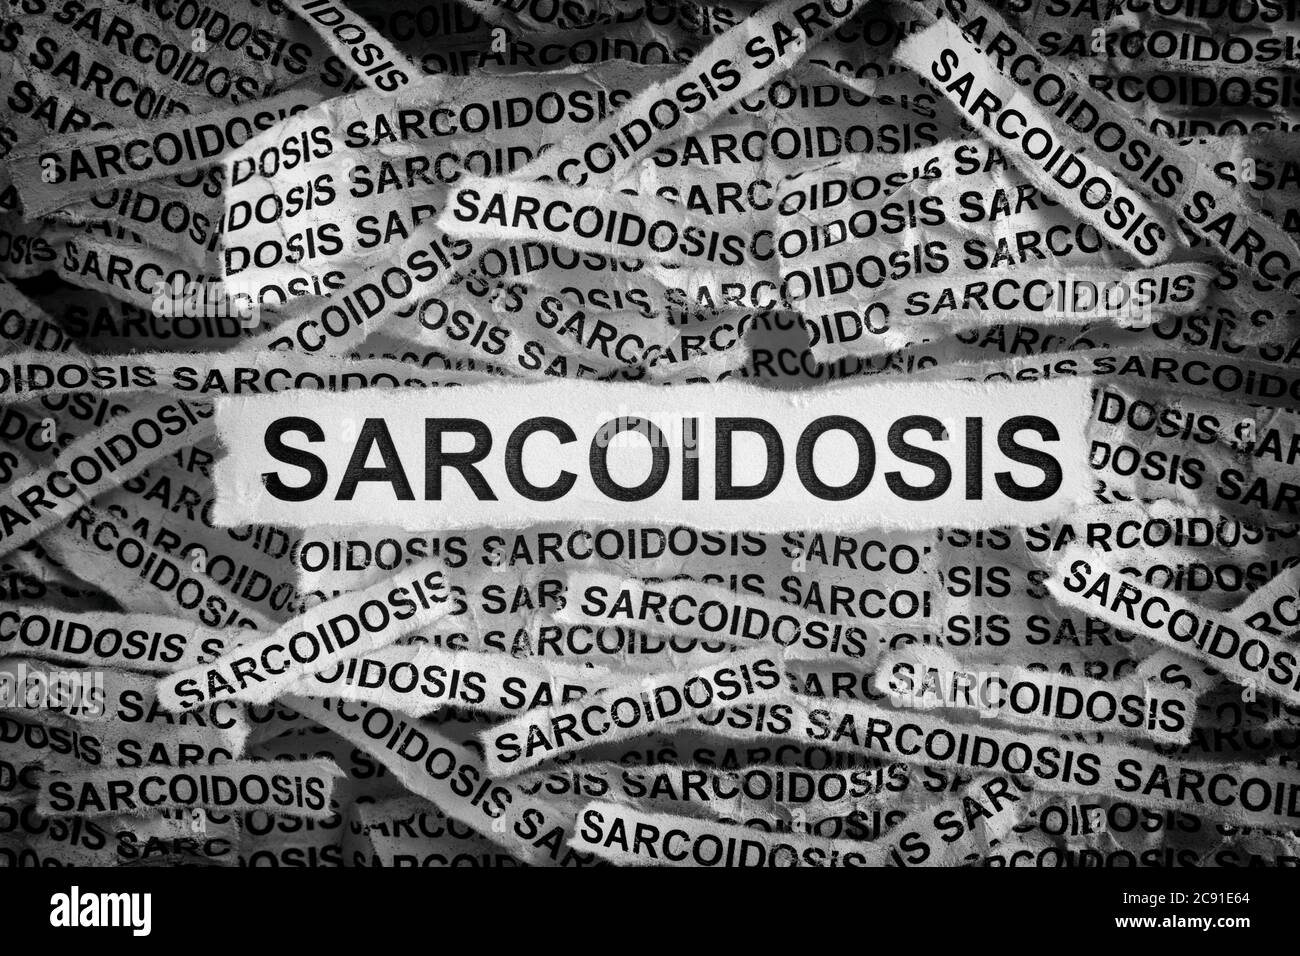 Sarcoidosis. Torn pieces of paper with the word Sarcoidosis. Concept Image. Black and white. Close up. Stock Photo